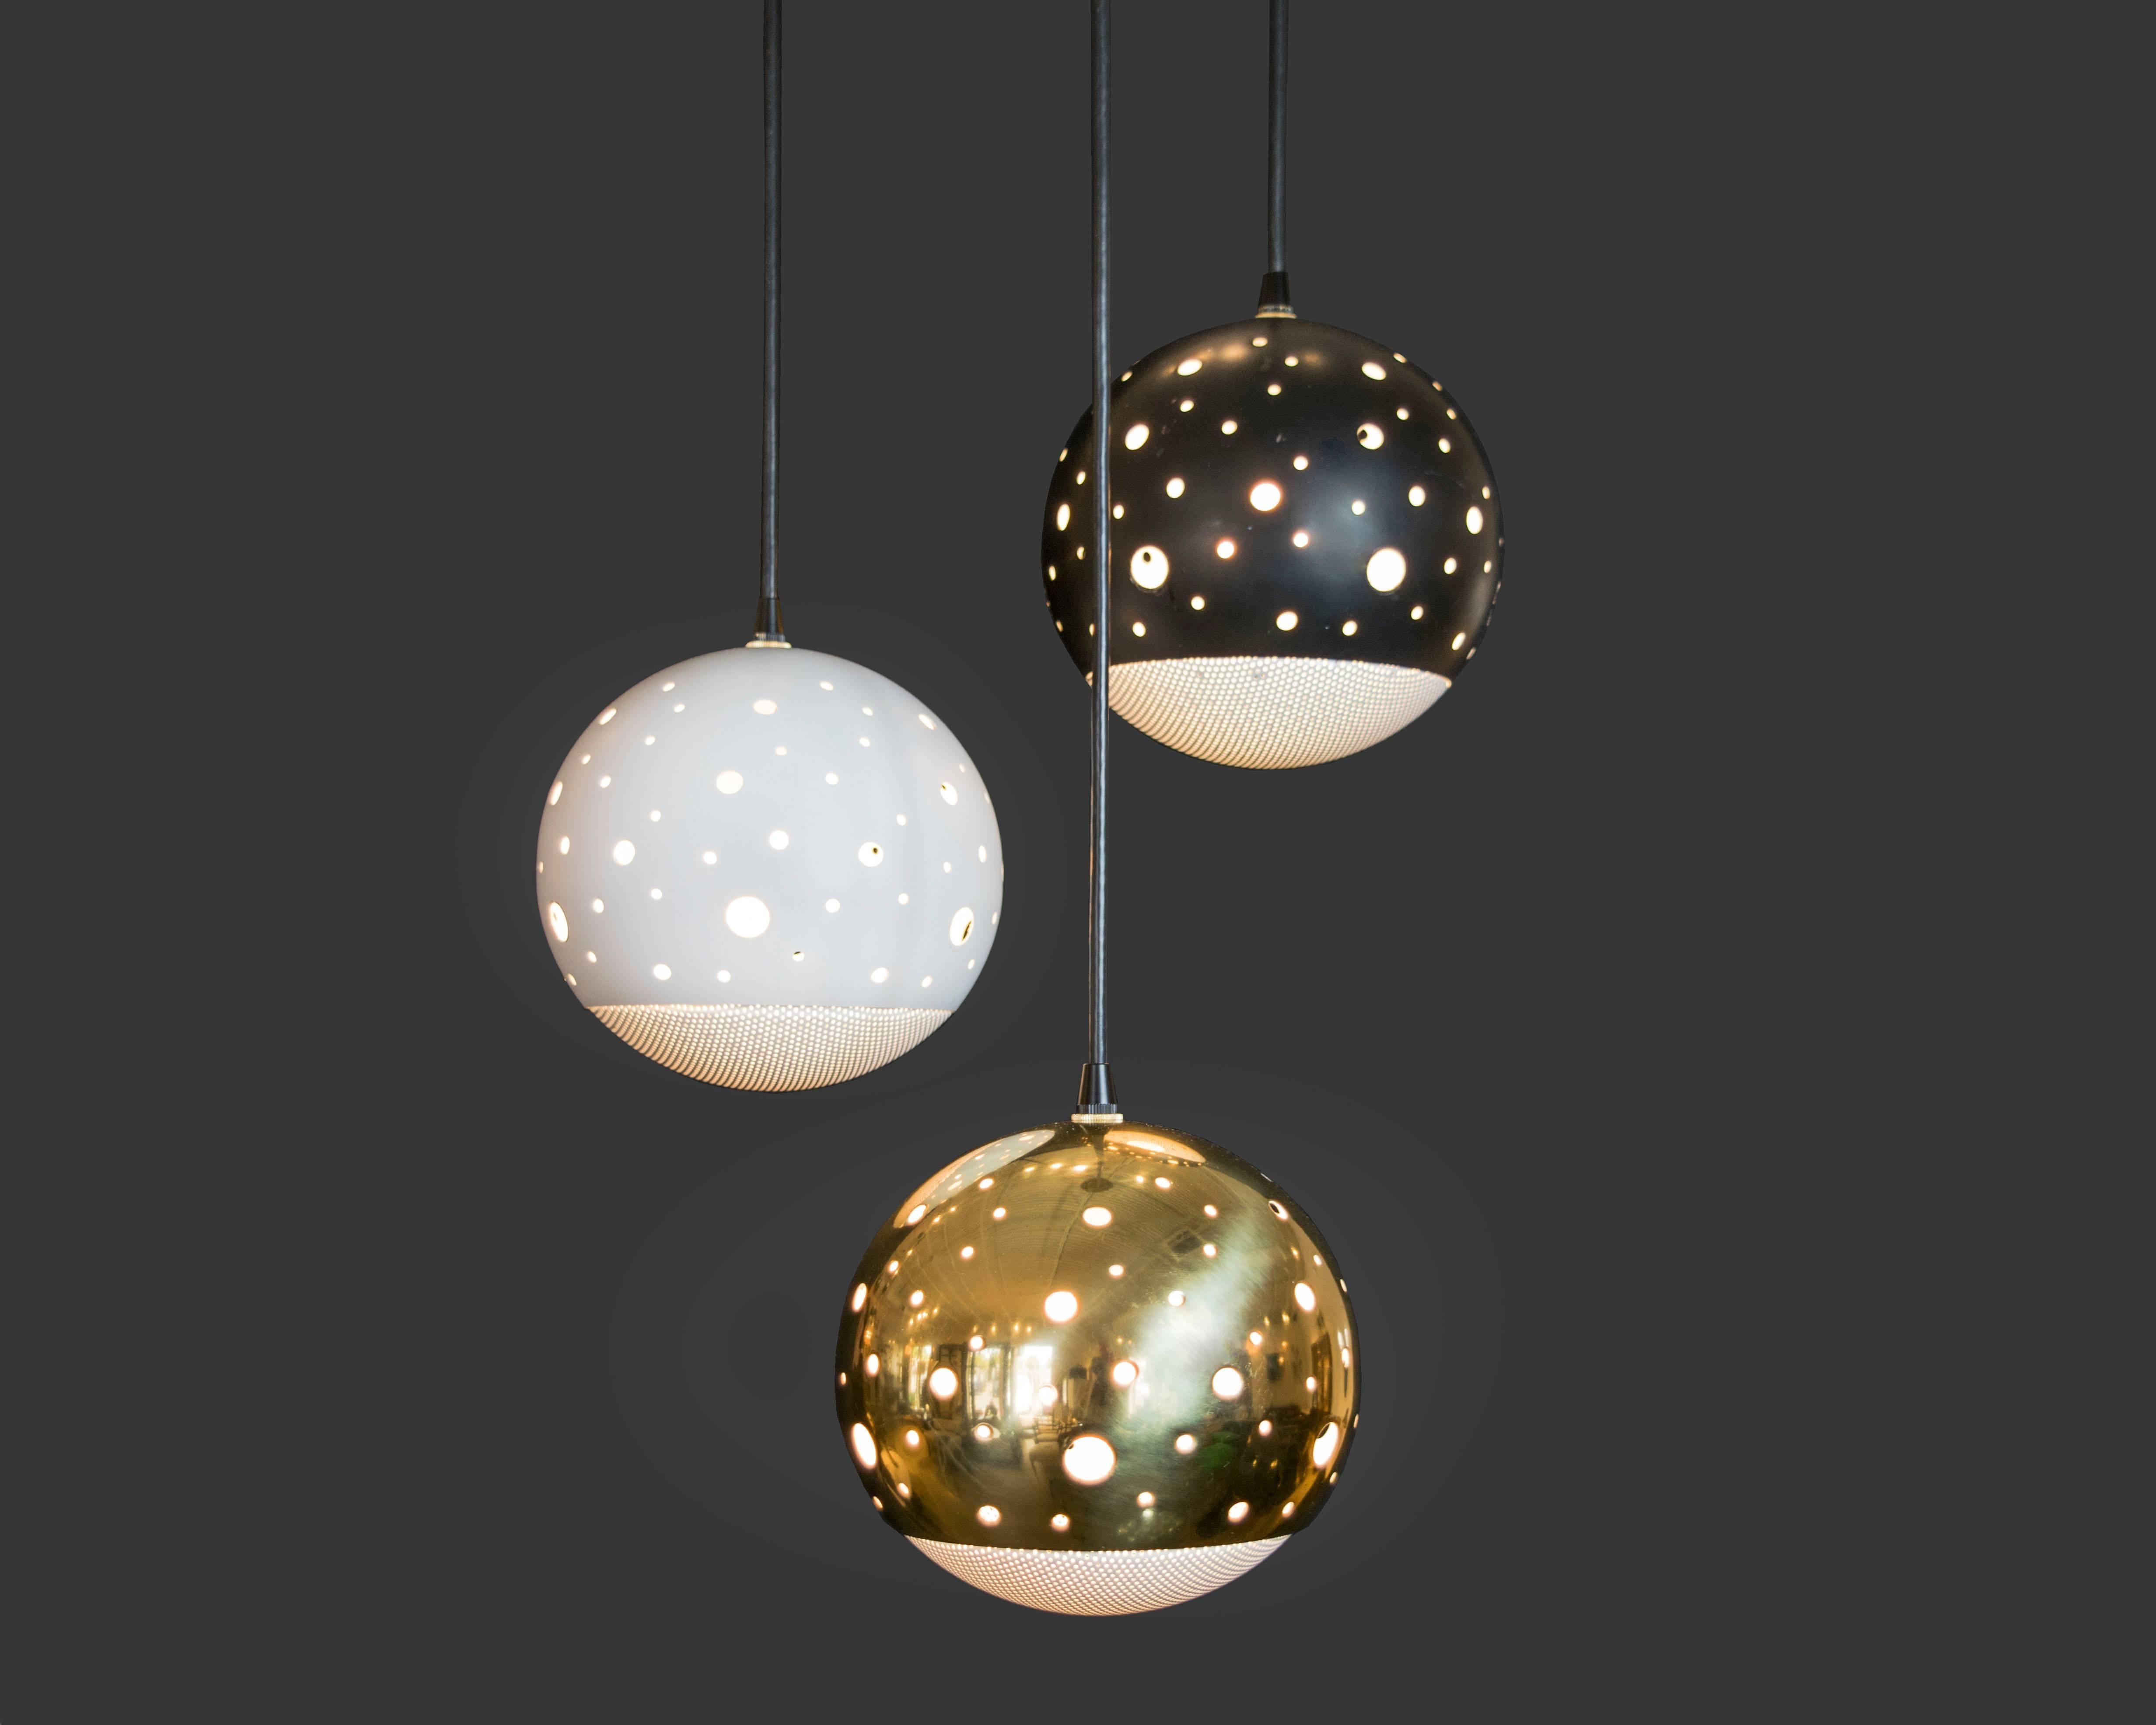 We've never come across another chandelier quite like this space aged three globe chandelier by Lightolier. The globes are perforated with varying sizes of circles and they have a wire mesh base. The globes can be adjusted and the light was recently